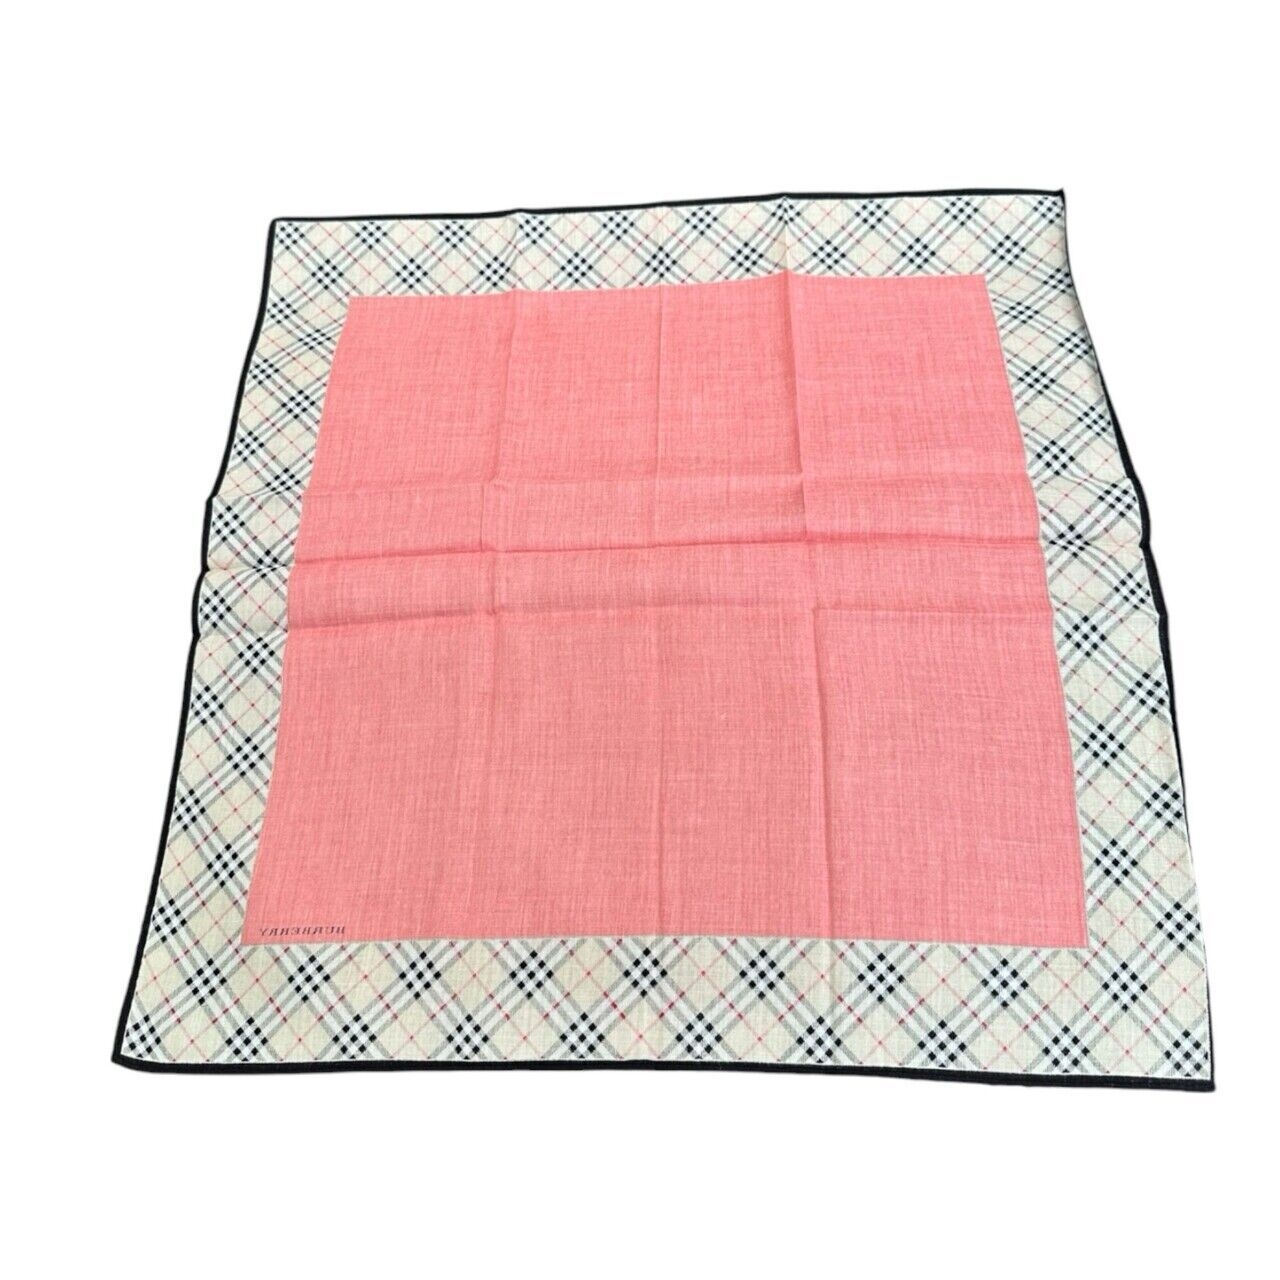 Burberry Beige Pink Plaid Small Scarf